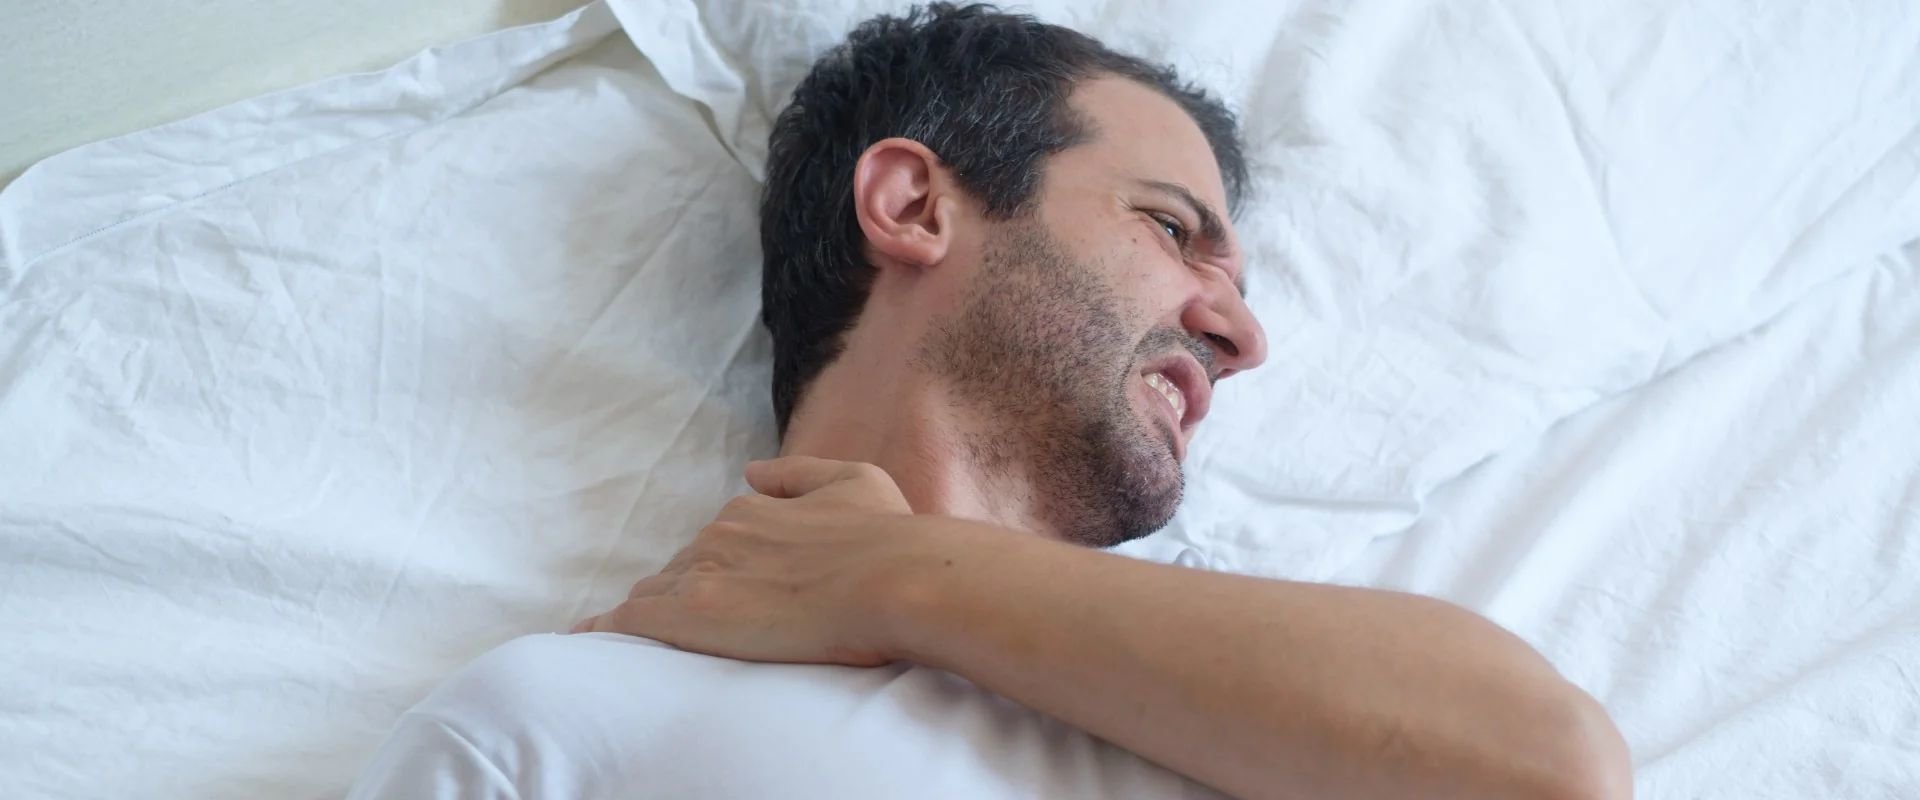 Man lying down on mattress holding his shoulder due to shoulder pain